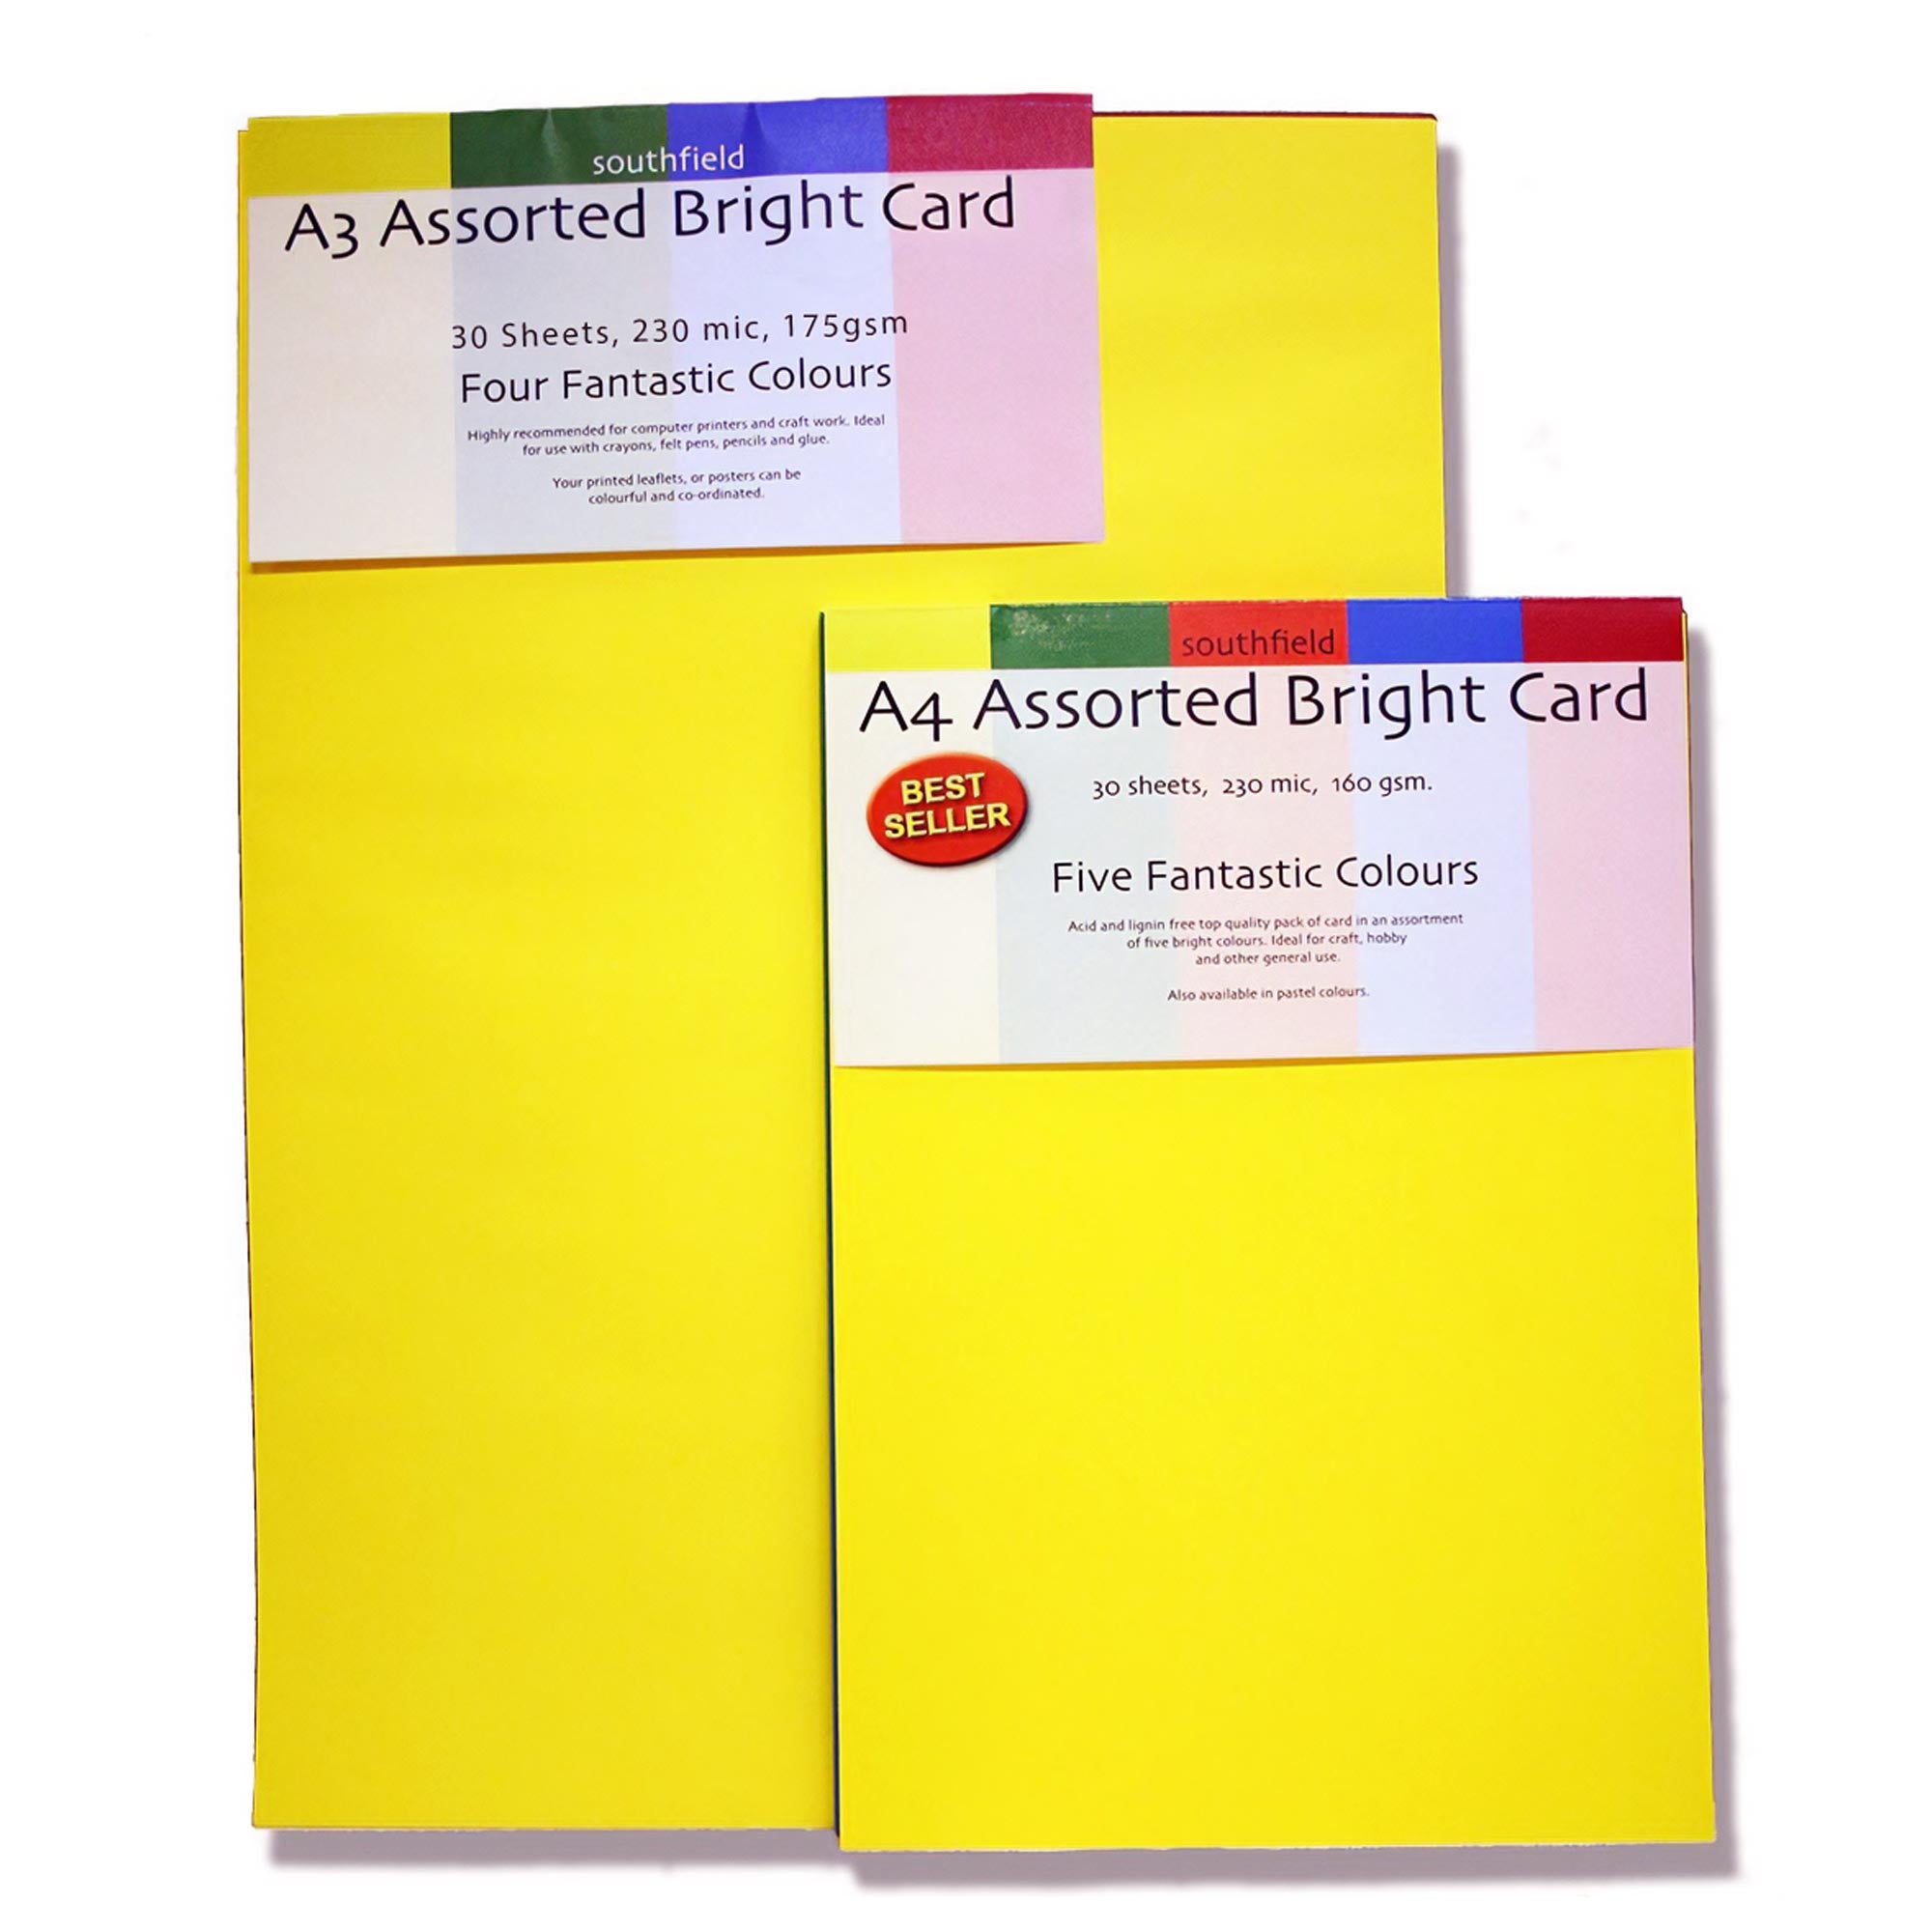 Southfield Assorted Bright Card - A3 & A4